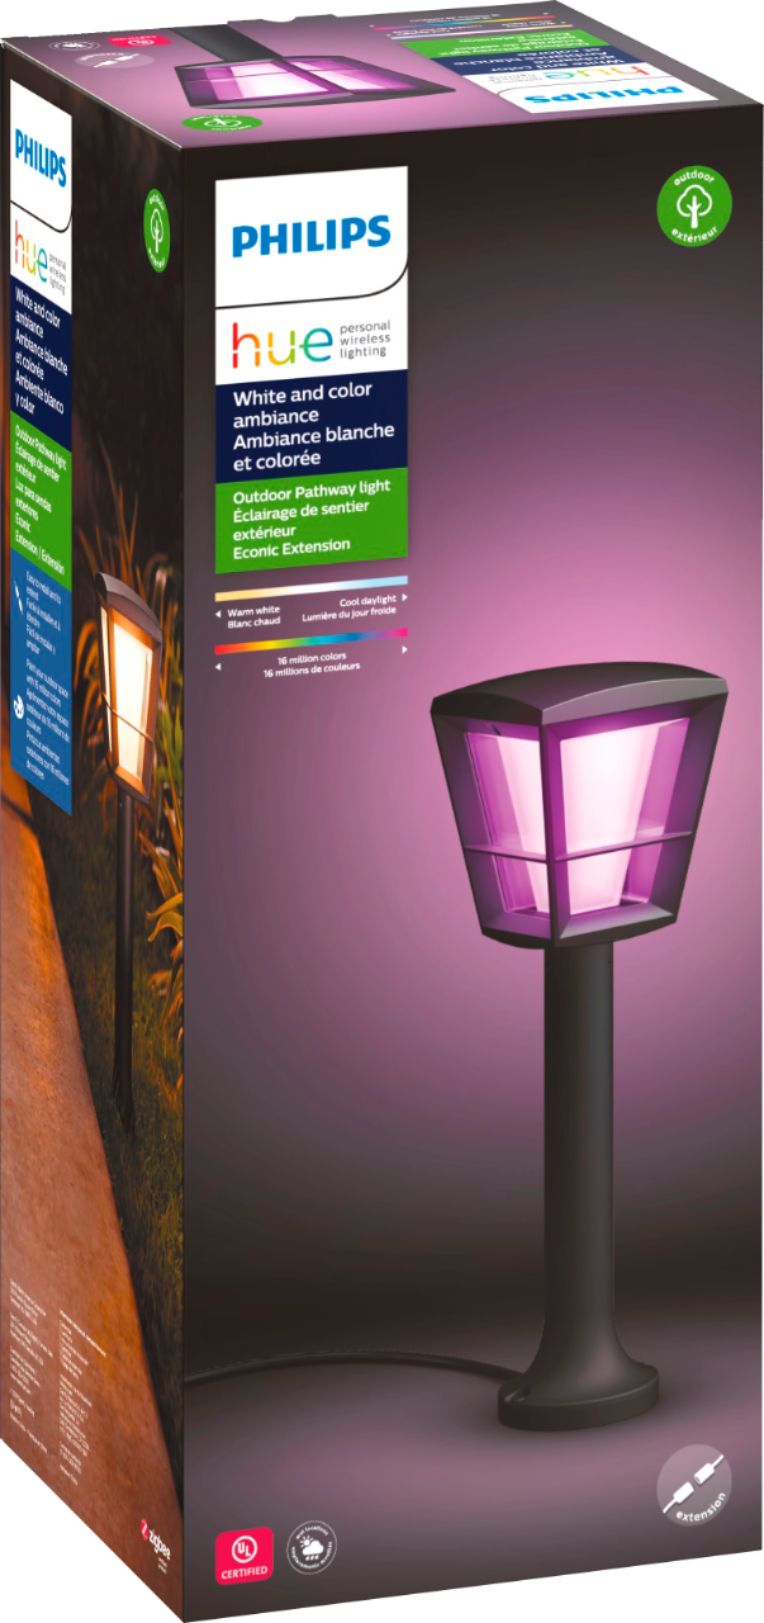 Angle View: Philips - Hue Econic Outdoor Pathway Light Extension - White and Color Ambiance